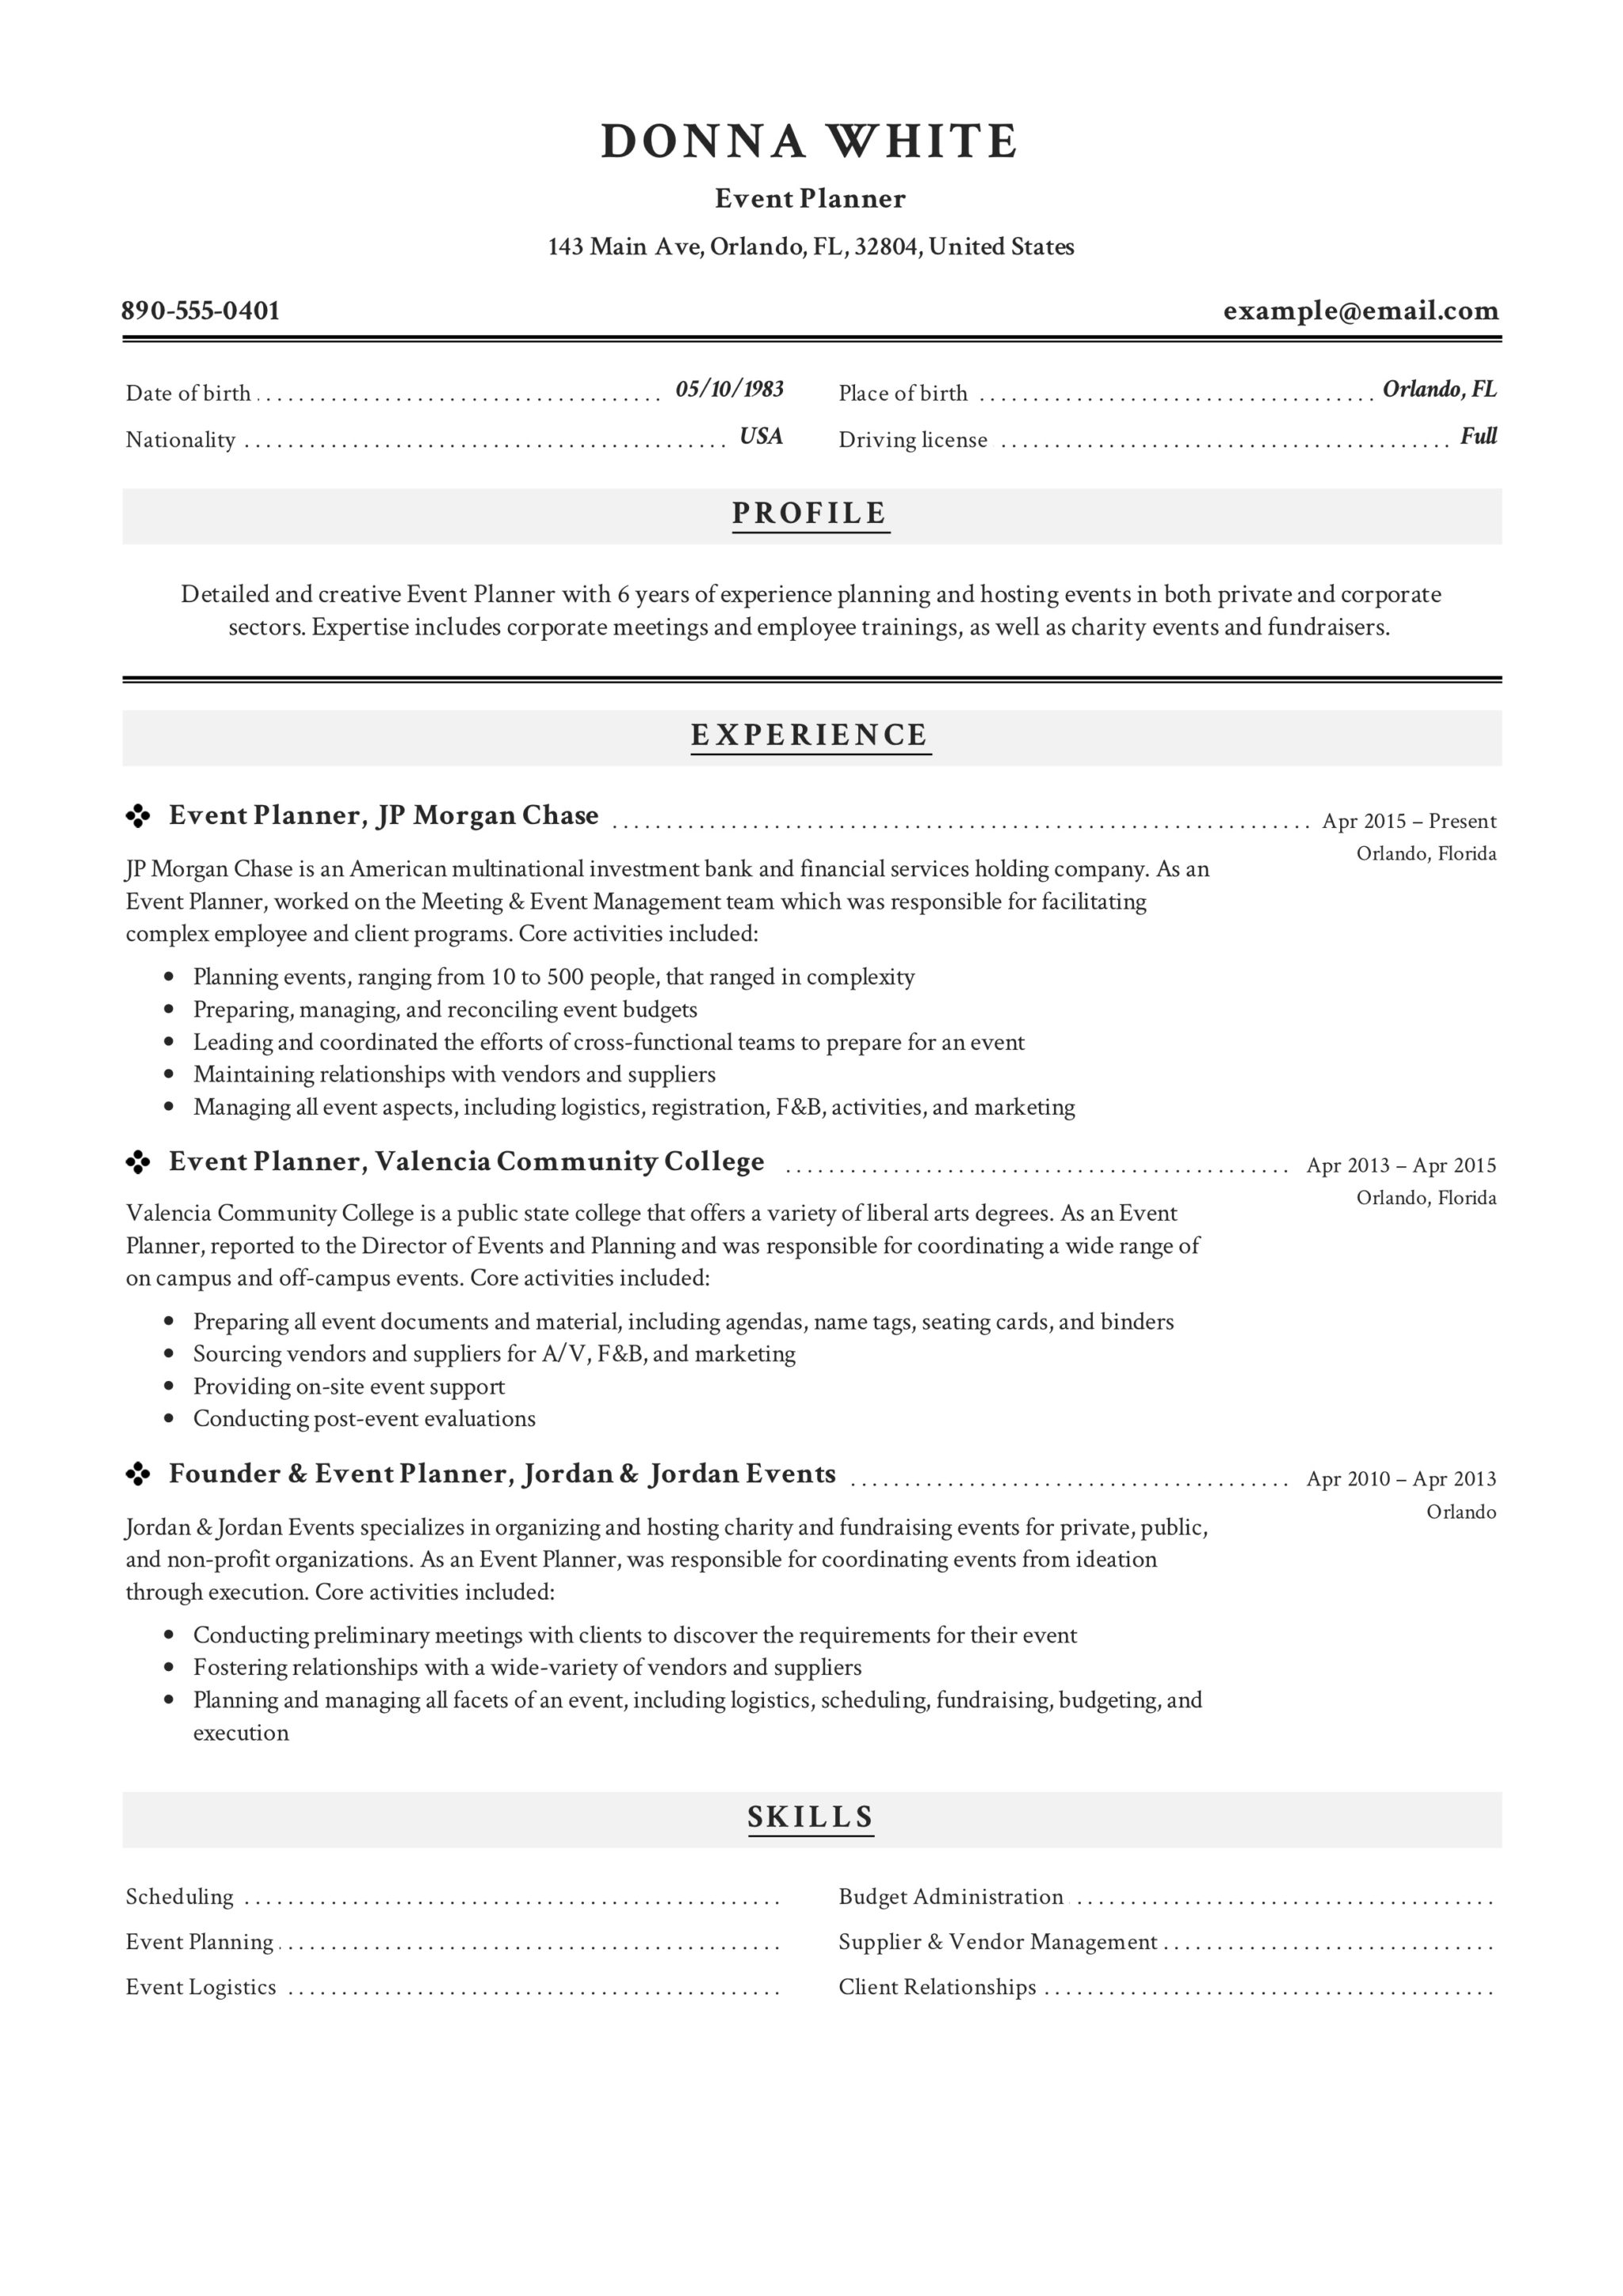 Professional Event Planner Resume Example